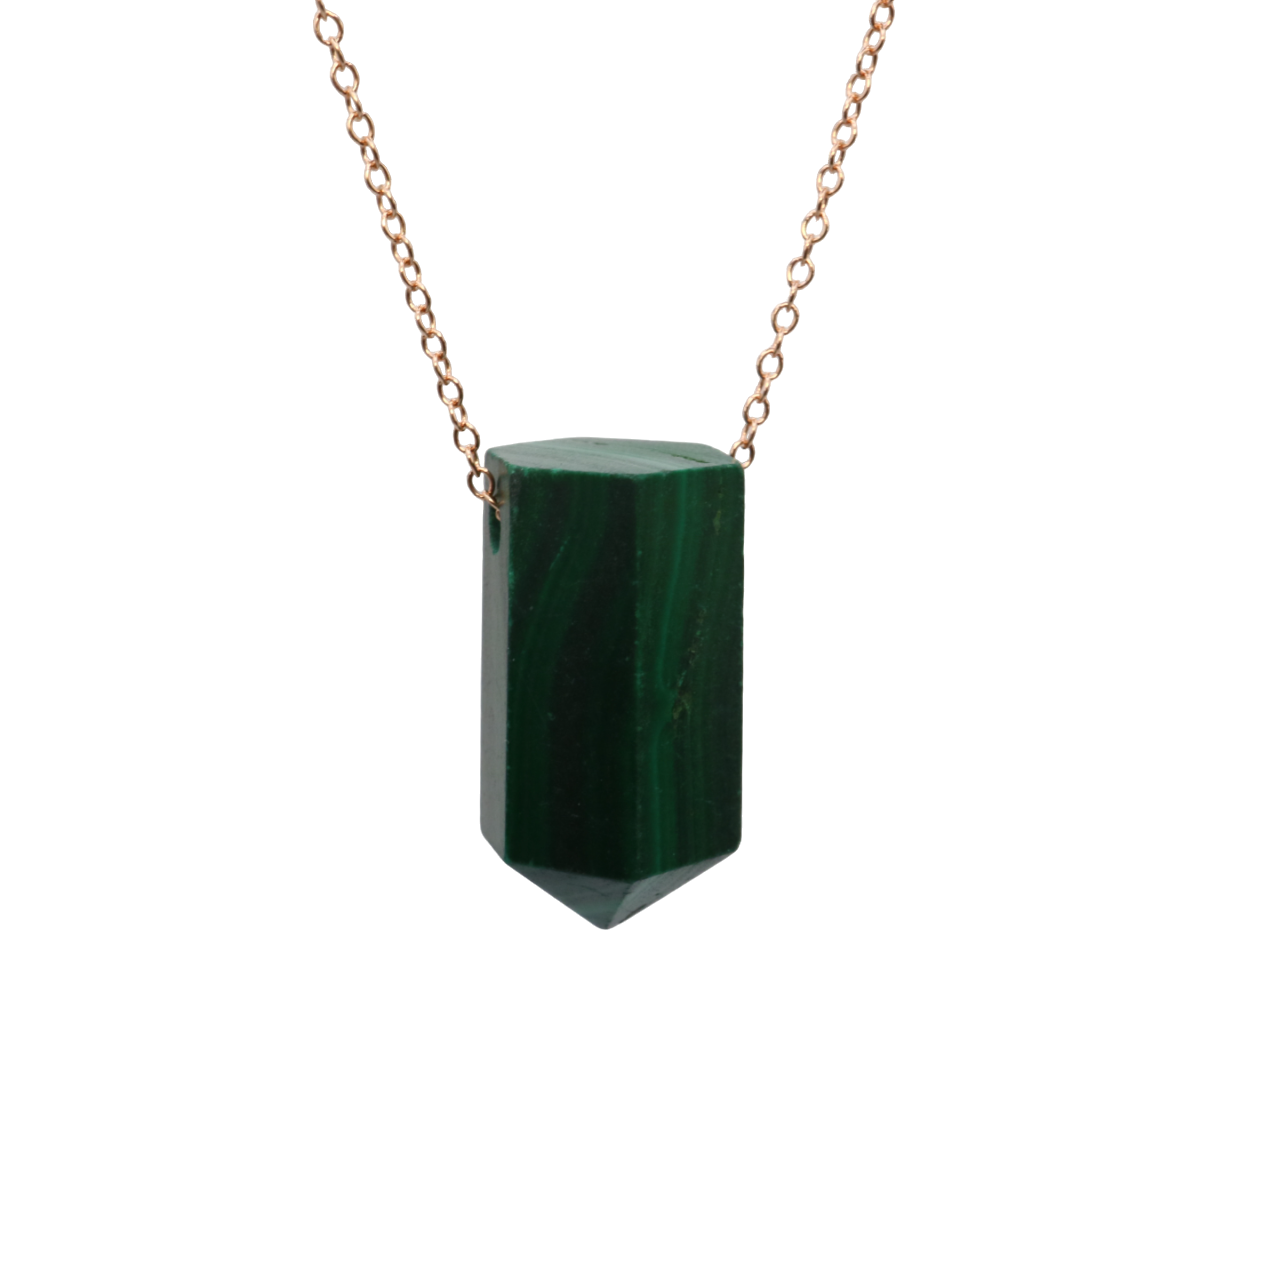 Malachite on a fine Rose Gold plated 925 Sterling Silver chain